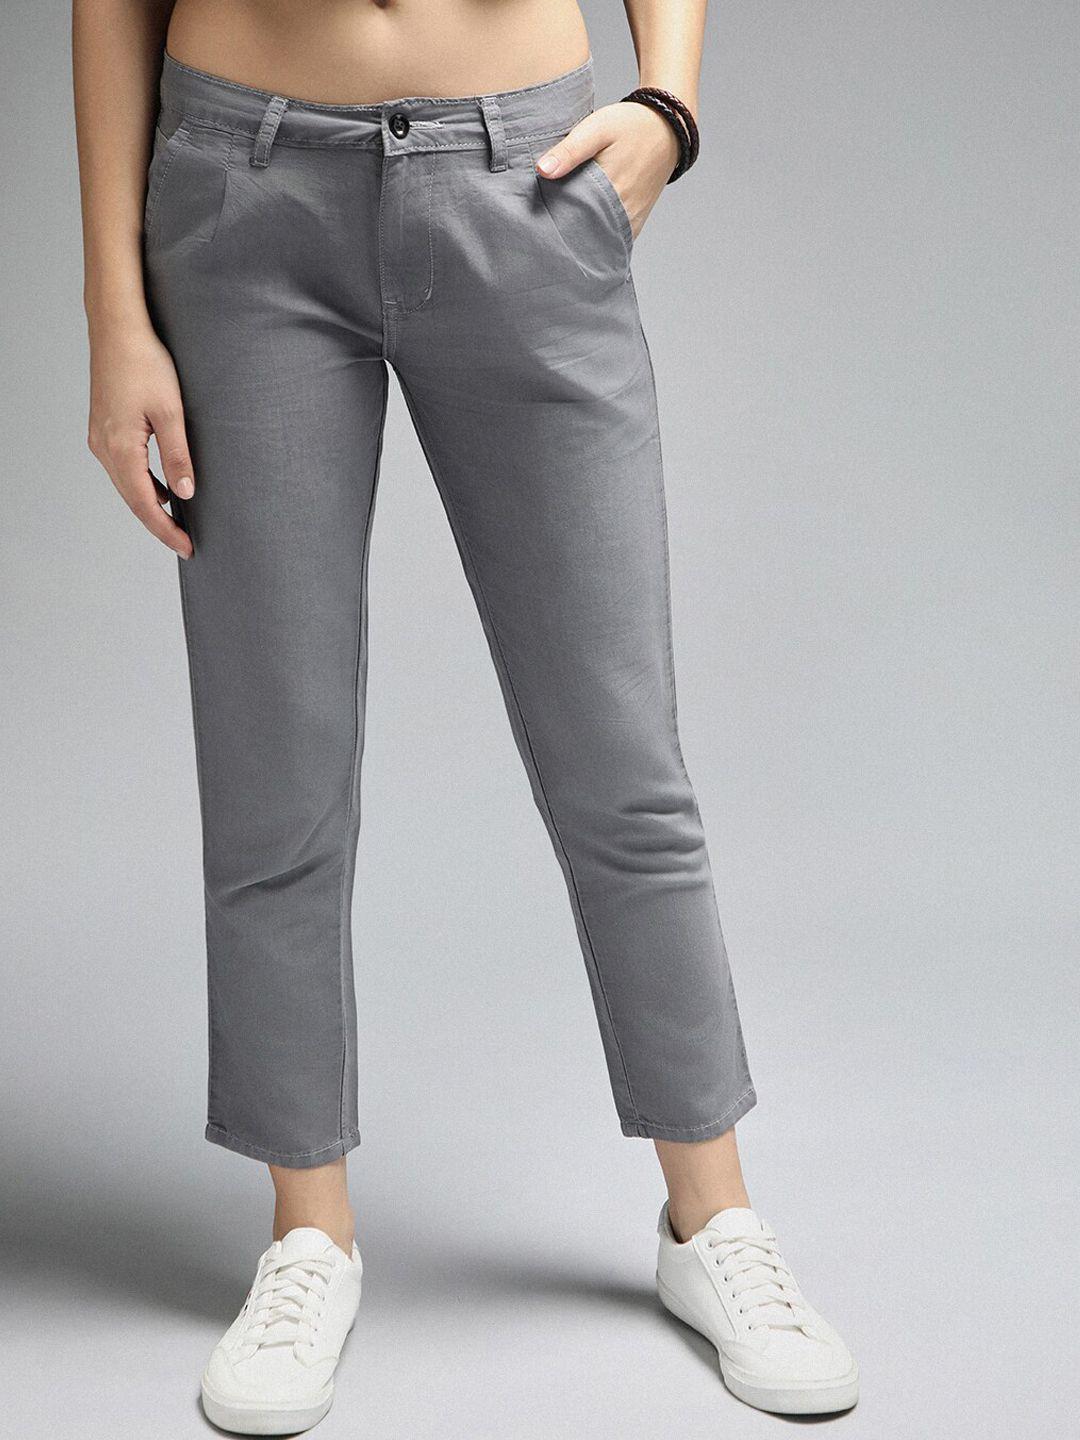 high-star-women-smart-slim-fit-high-rise-plain-pleated-chinos-trousers